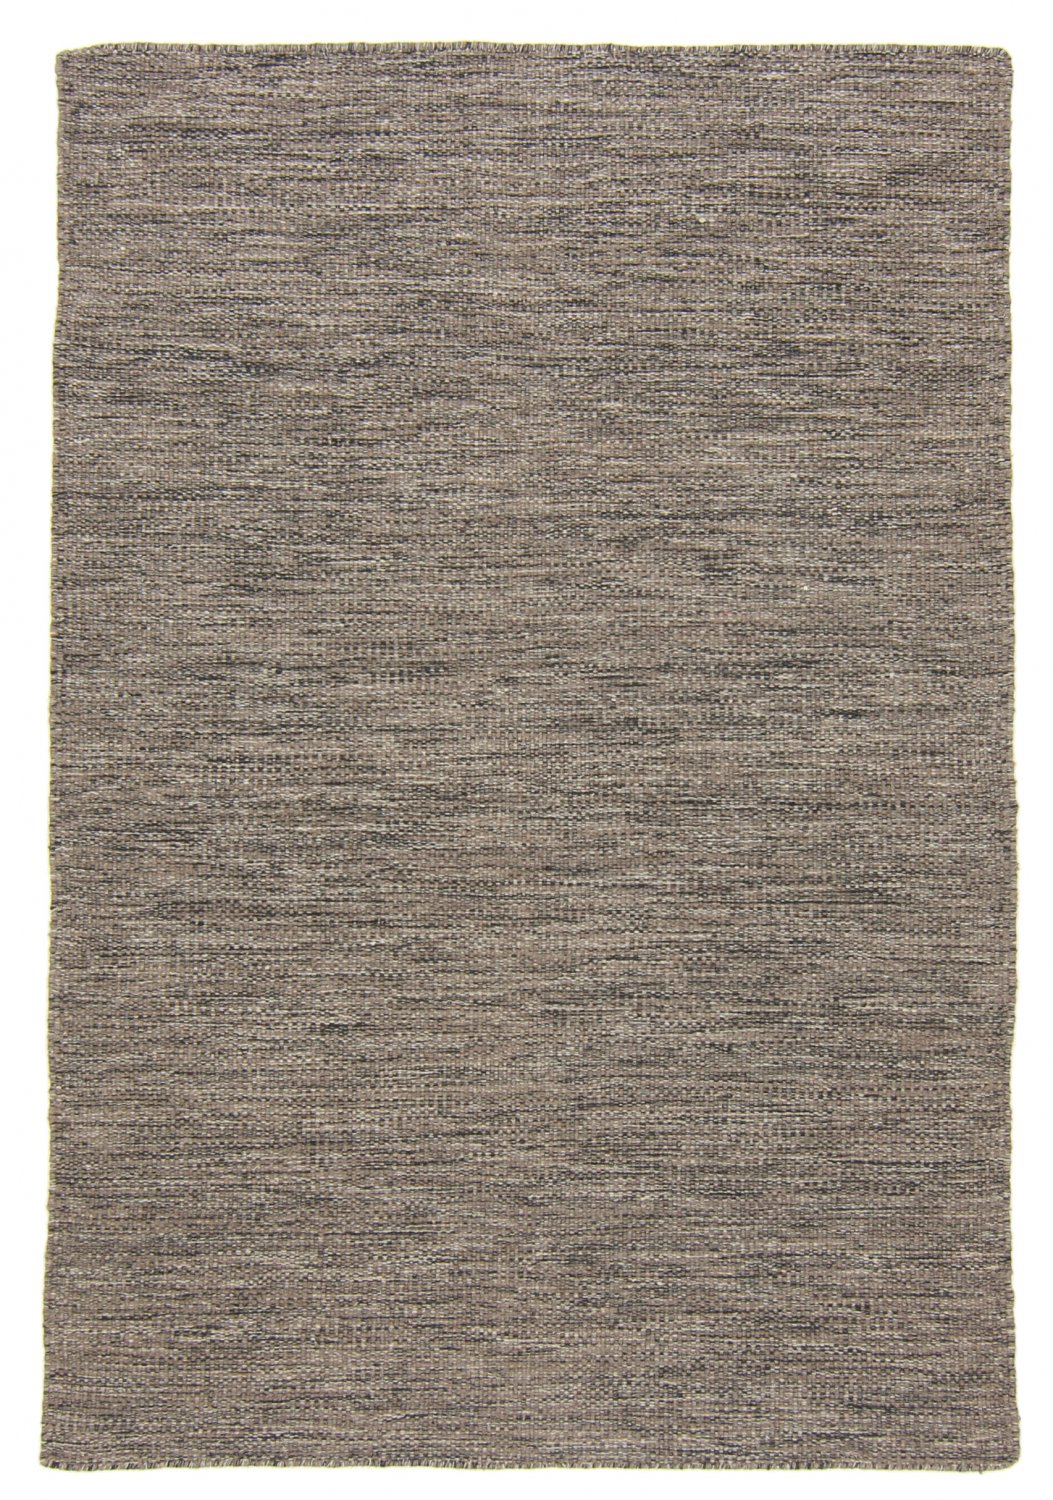 Wool rug - Dhurry (anthracite)